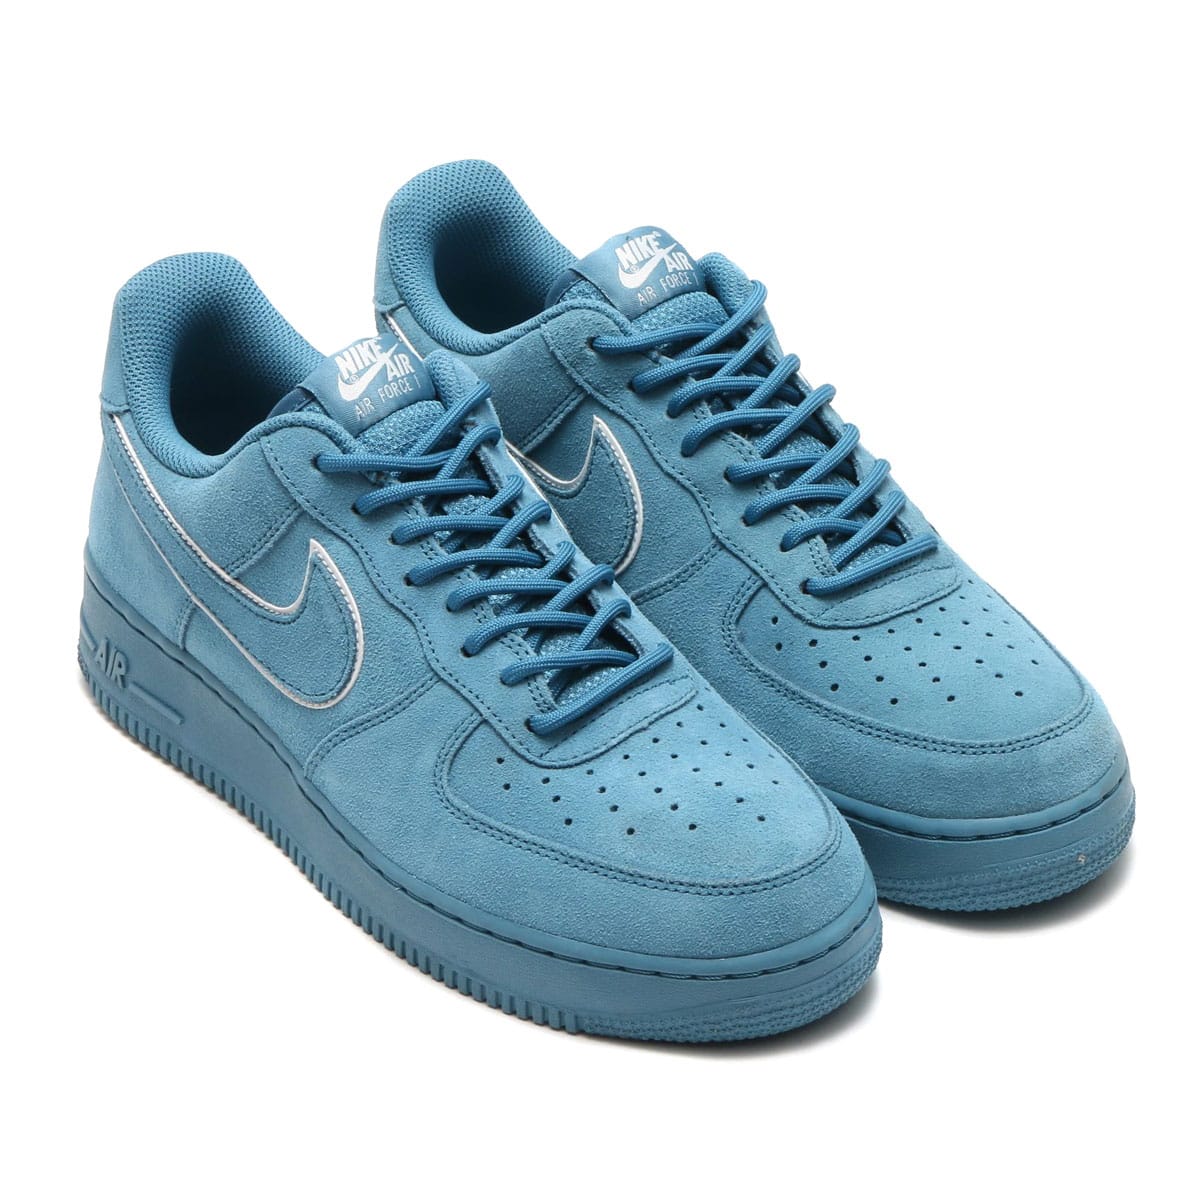 NIKE AIR FORCE 1 '07 LV8 SUEDE NOISE 